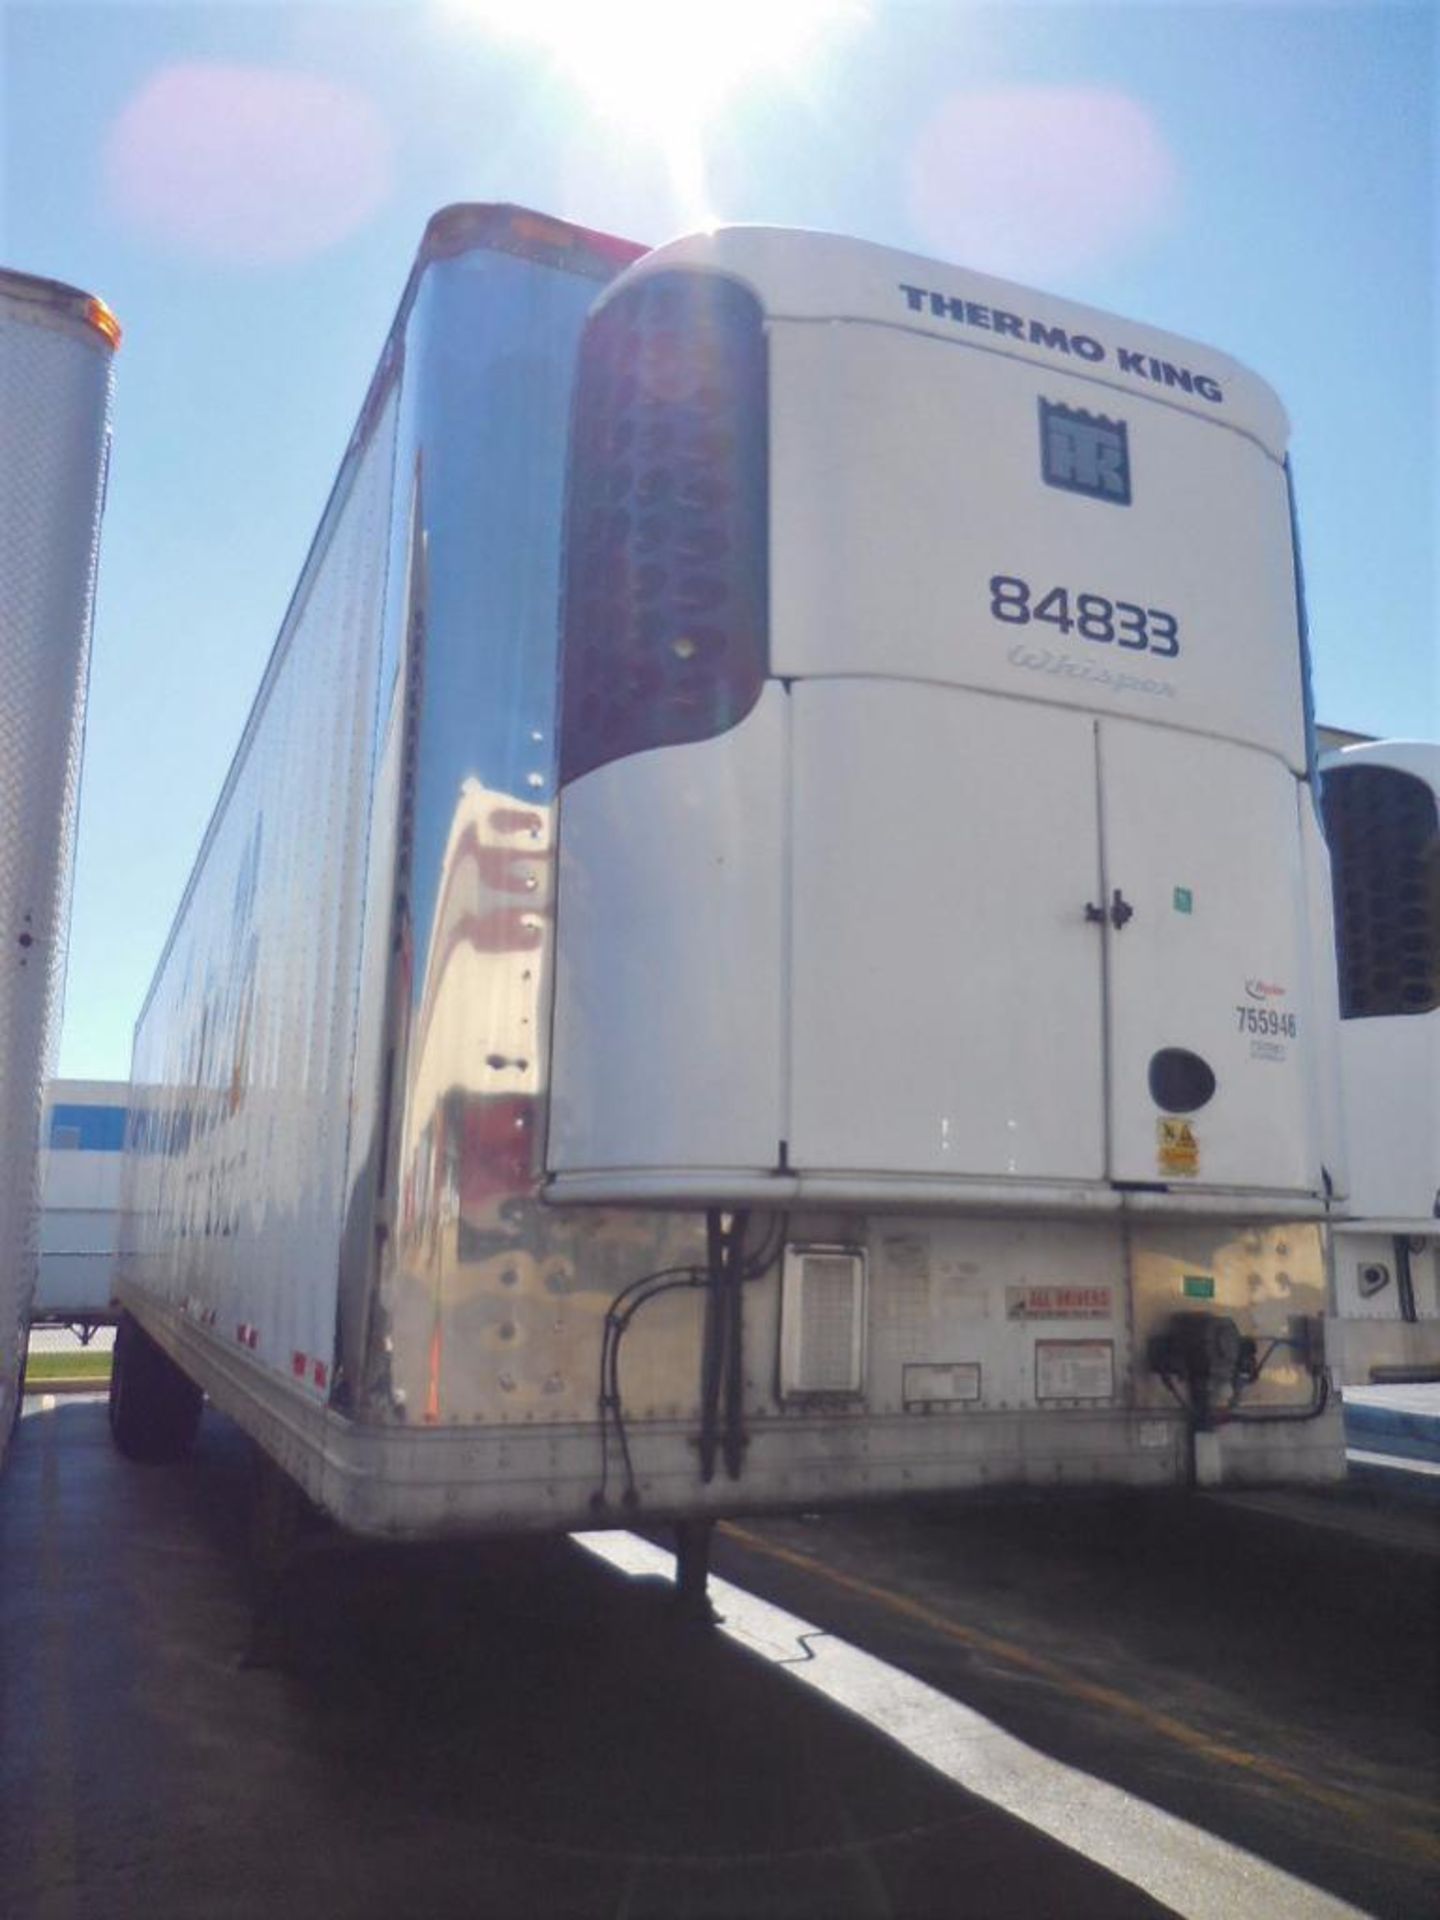 2004 Great Dane 48' Refrigerated Trailer, VIN # 1GRAA96245B703097, Unit 84833 - Image 2 of 16